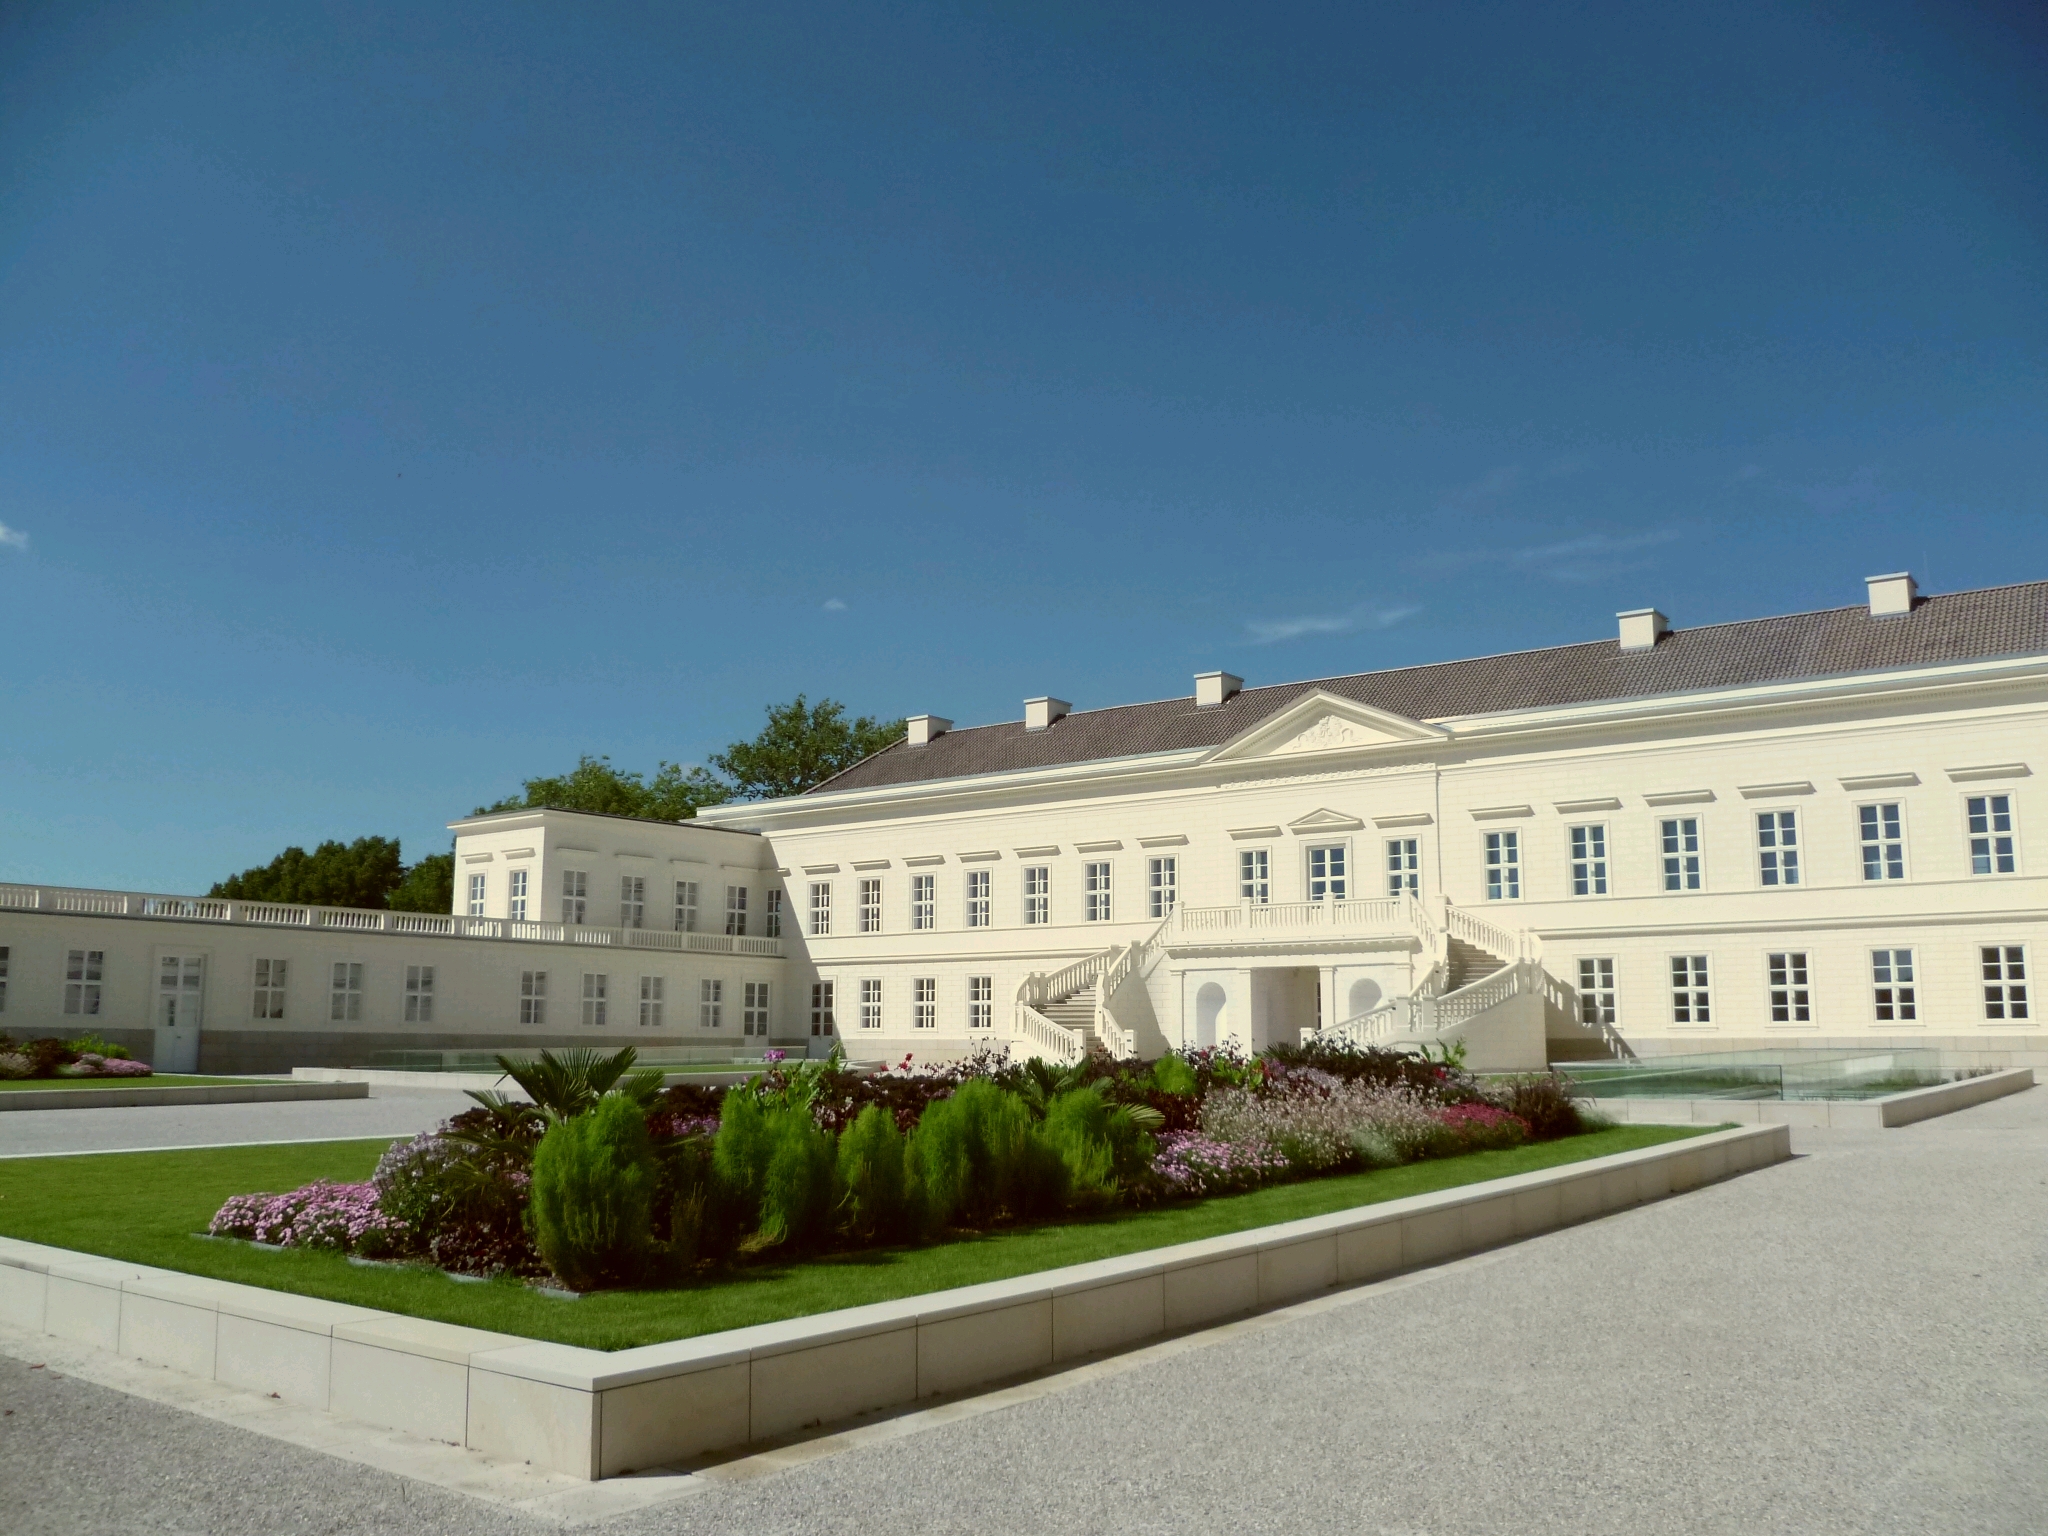 Fig. 1 Hanover, Schloss Herrenhausen, c.1640-1943, rebuilt 2013 in its classicistic appearance conducted by Georg Ludwig Friedrich Laves in 1818.